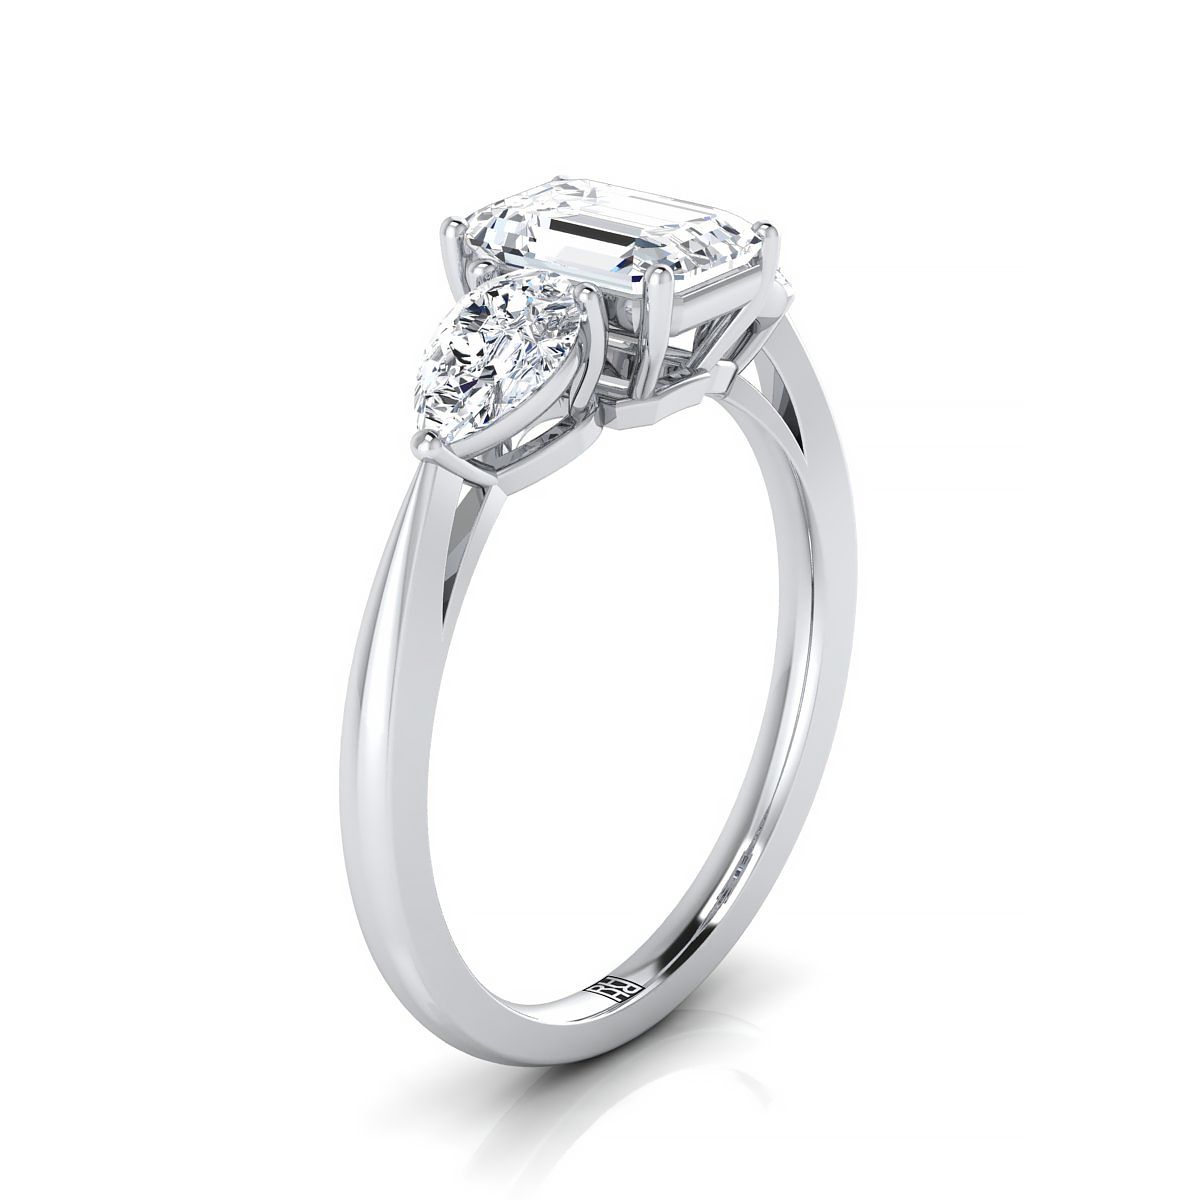 18K White Gold Emerald Cut Diamond Perfectly Matched Pear Shaped Three Diamond Engagement Ring -7/8ctw